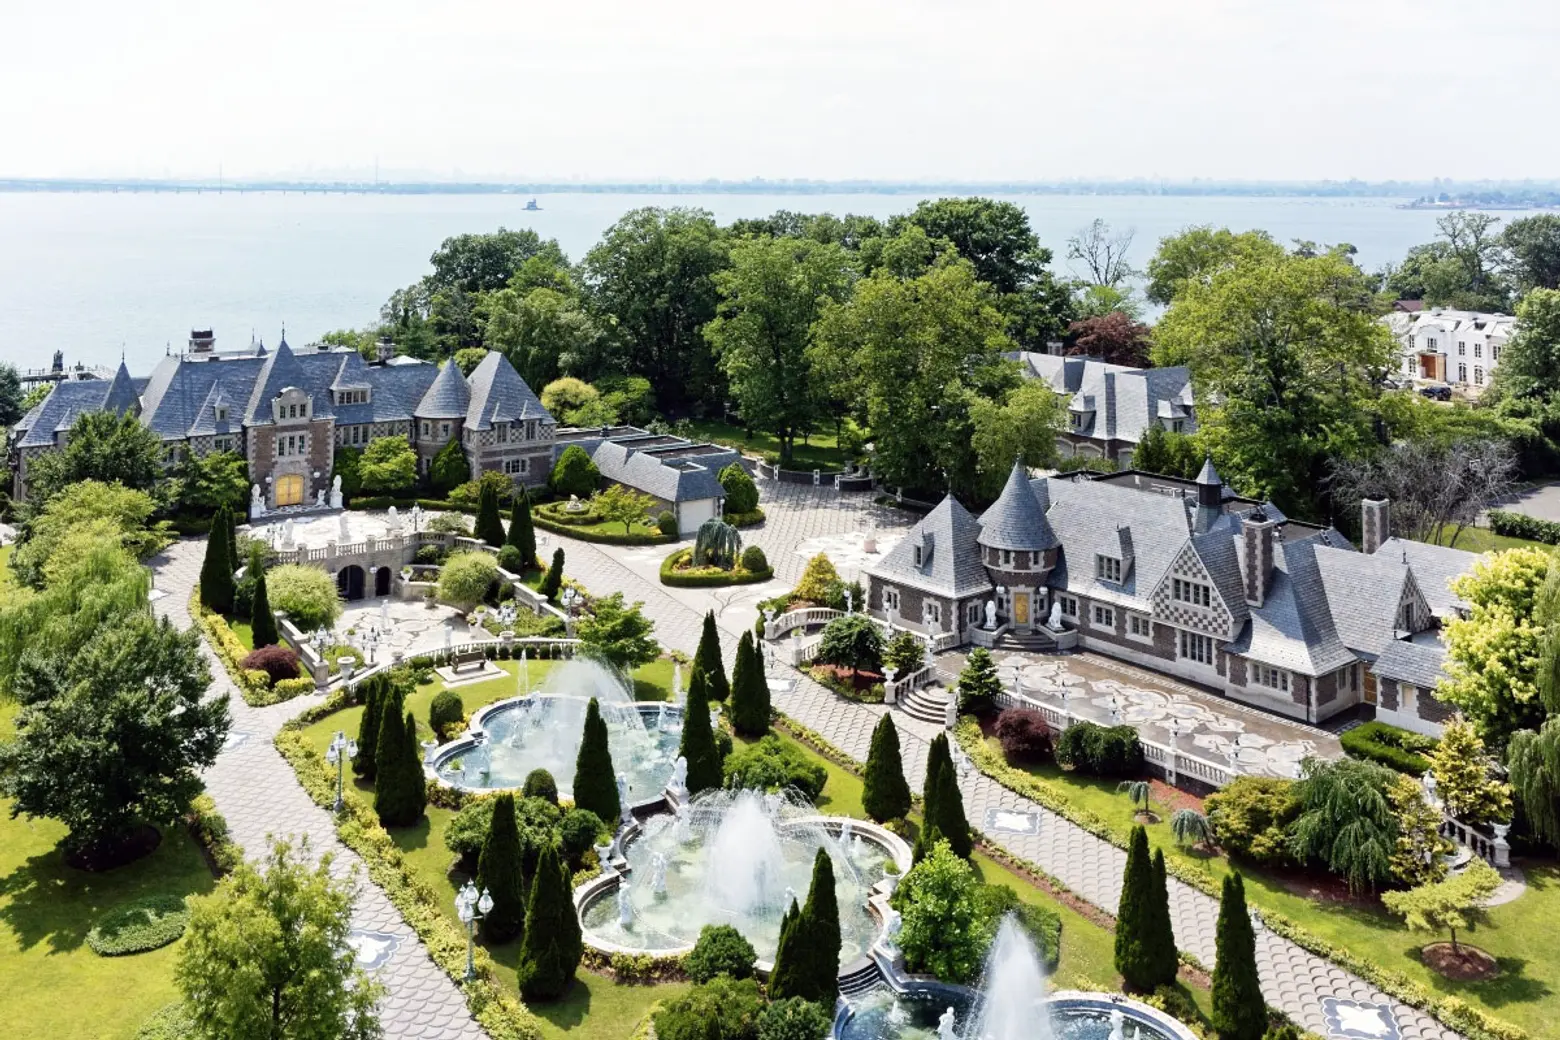 Russian Castle on Long Island With 35 Bathrooms Asks a Whopping $100M